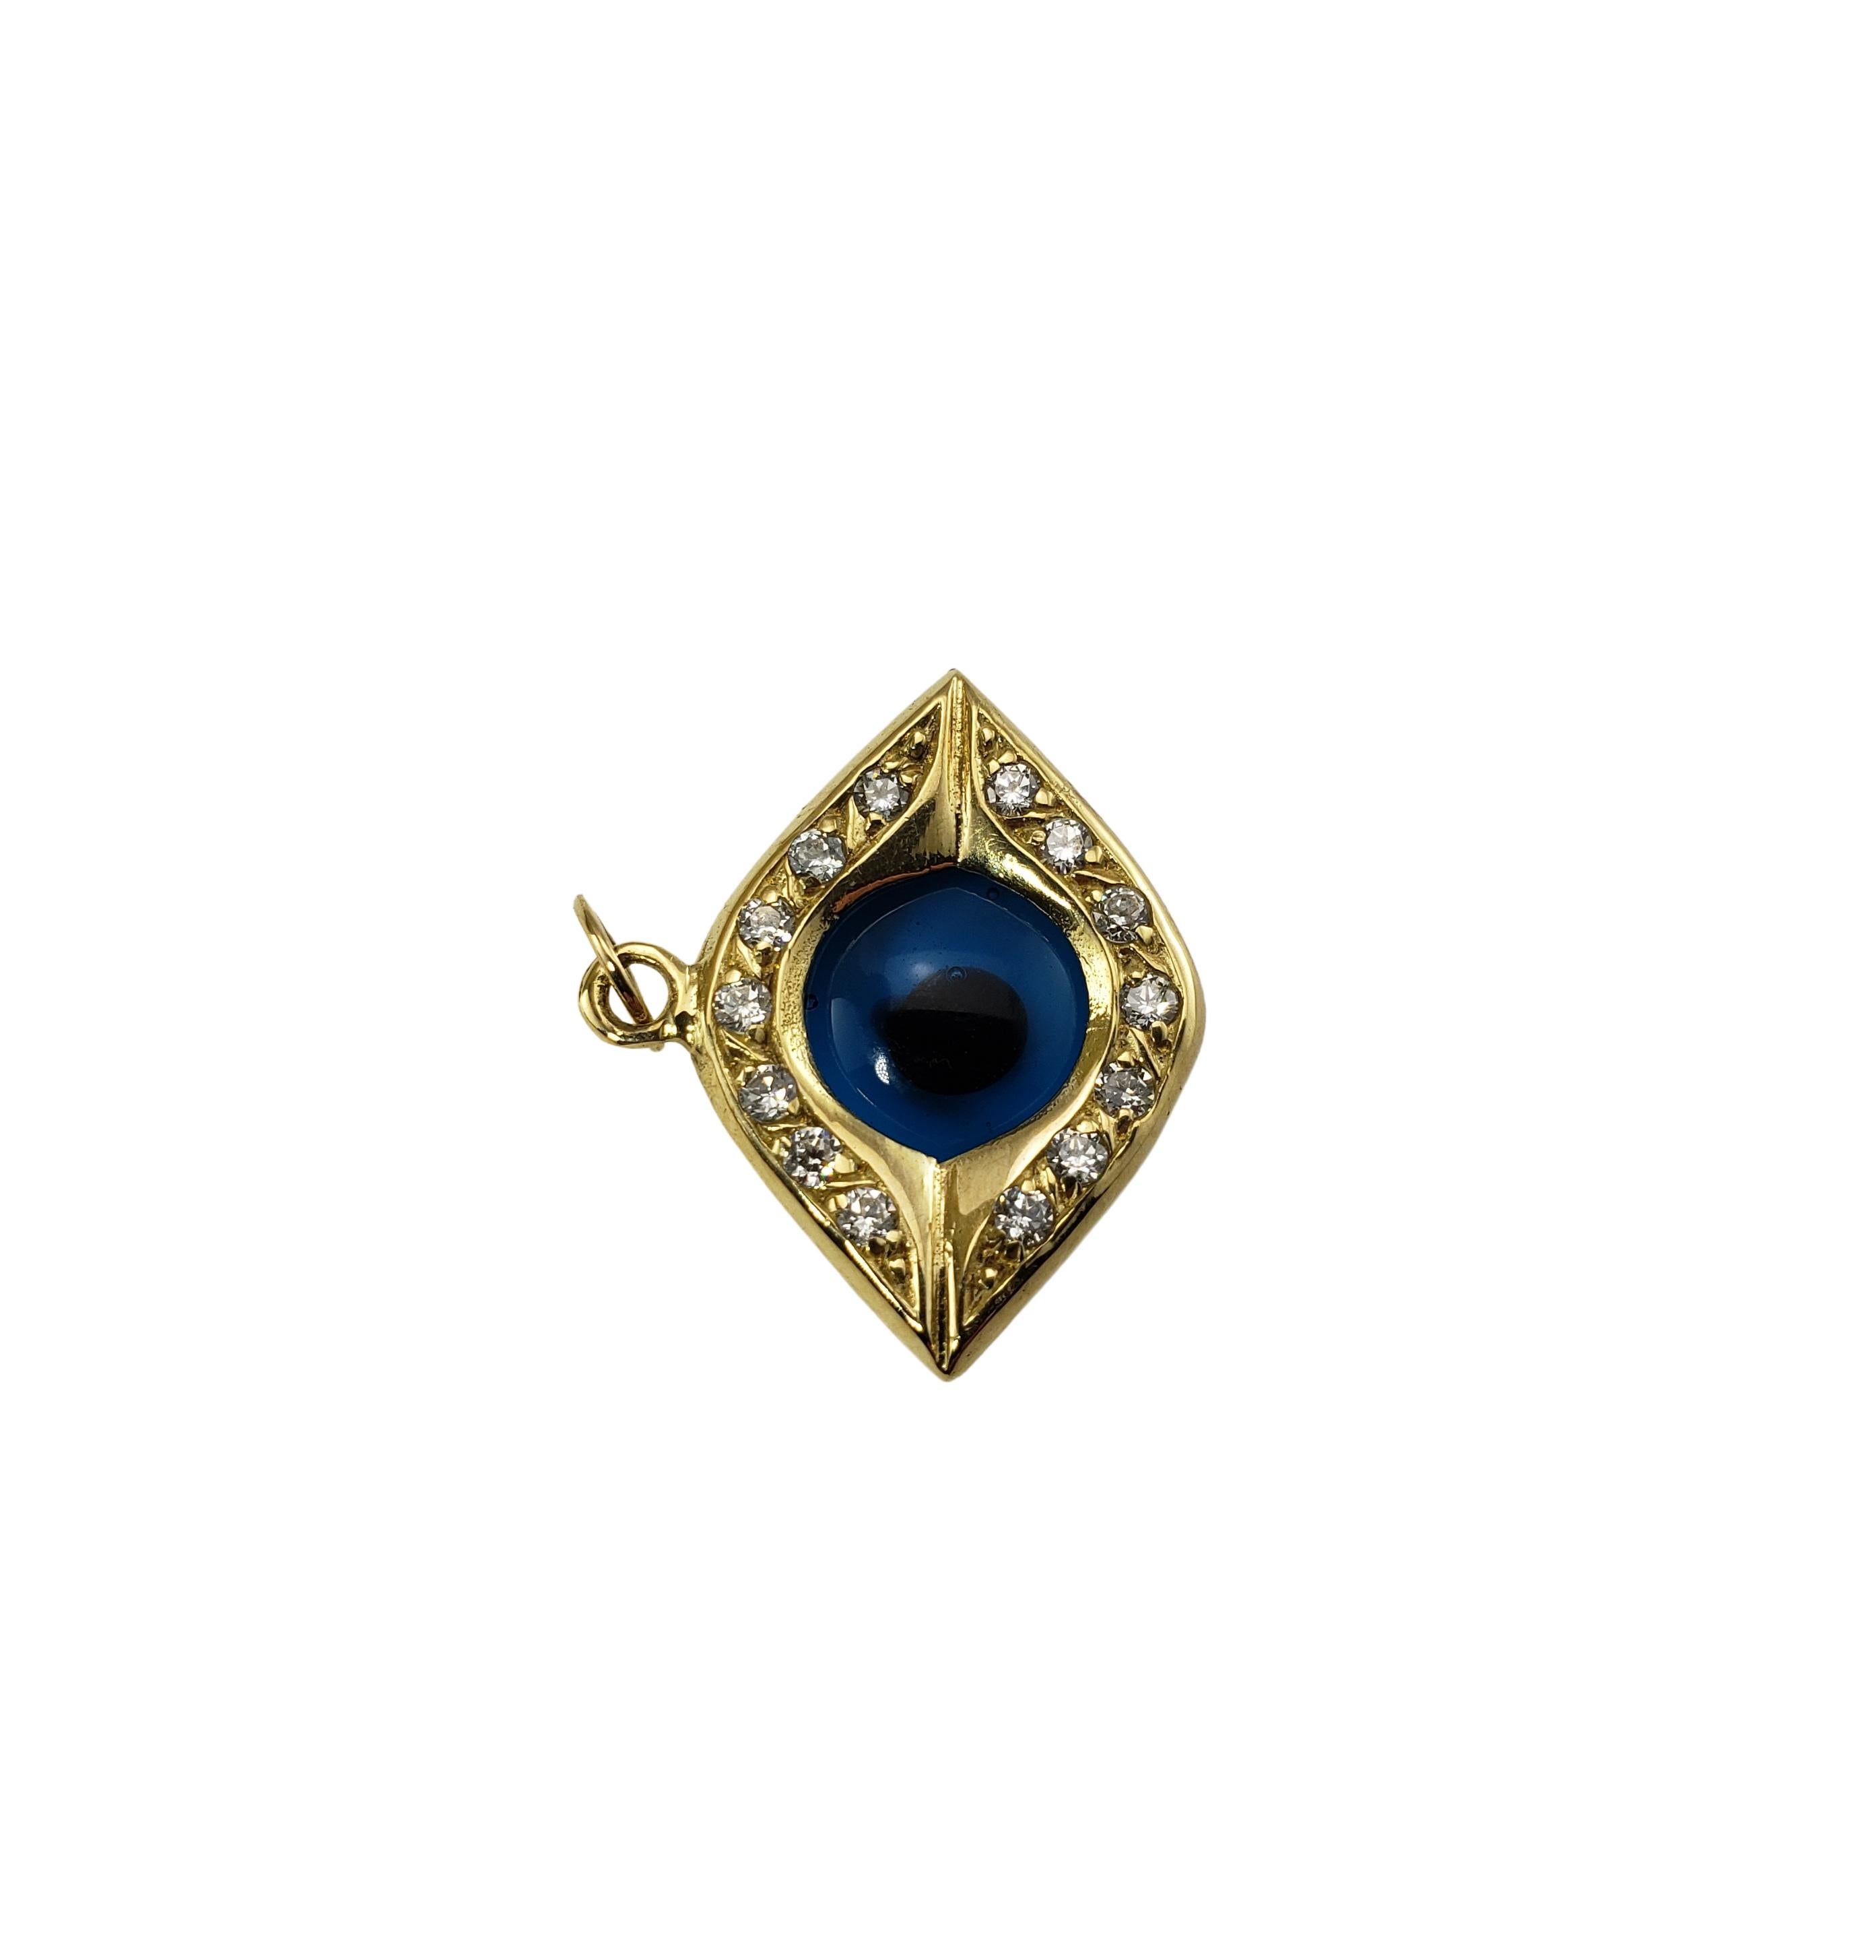 14 Karat Yellow Gold Evil Eye Pendant-

This lovely evil eye pendant is set in 14K yellow gold. Stones are cubic zirconia. 

Size:  16 mm x 18 mm

Weight:  1.7 dwt. /  2.6 gr.

Stamped: 8306   14K

*Chain not included

Very good condition,